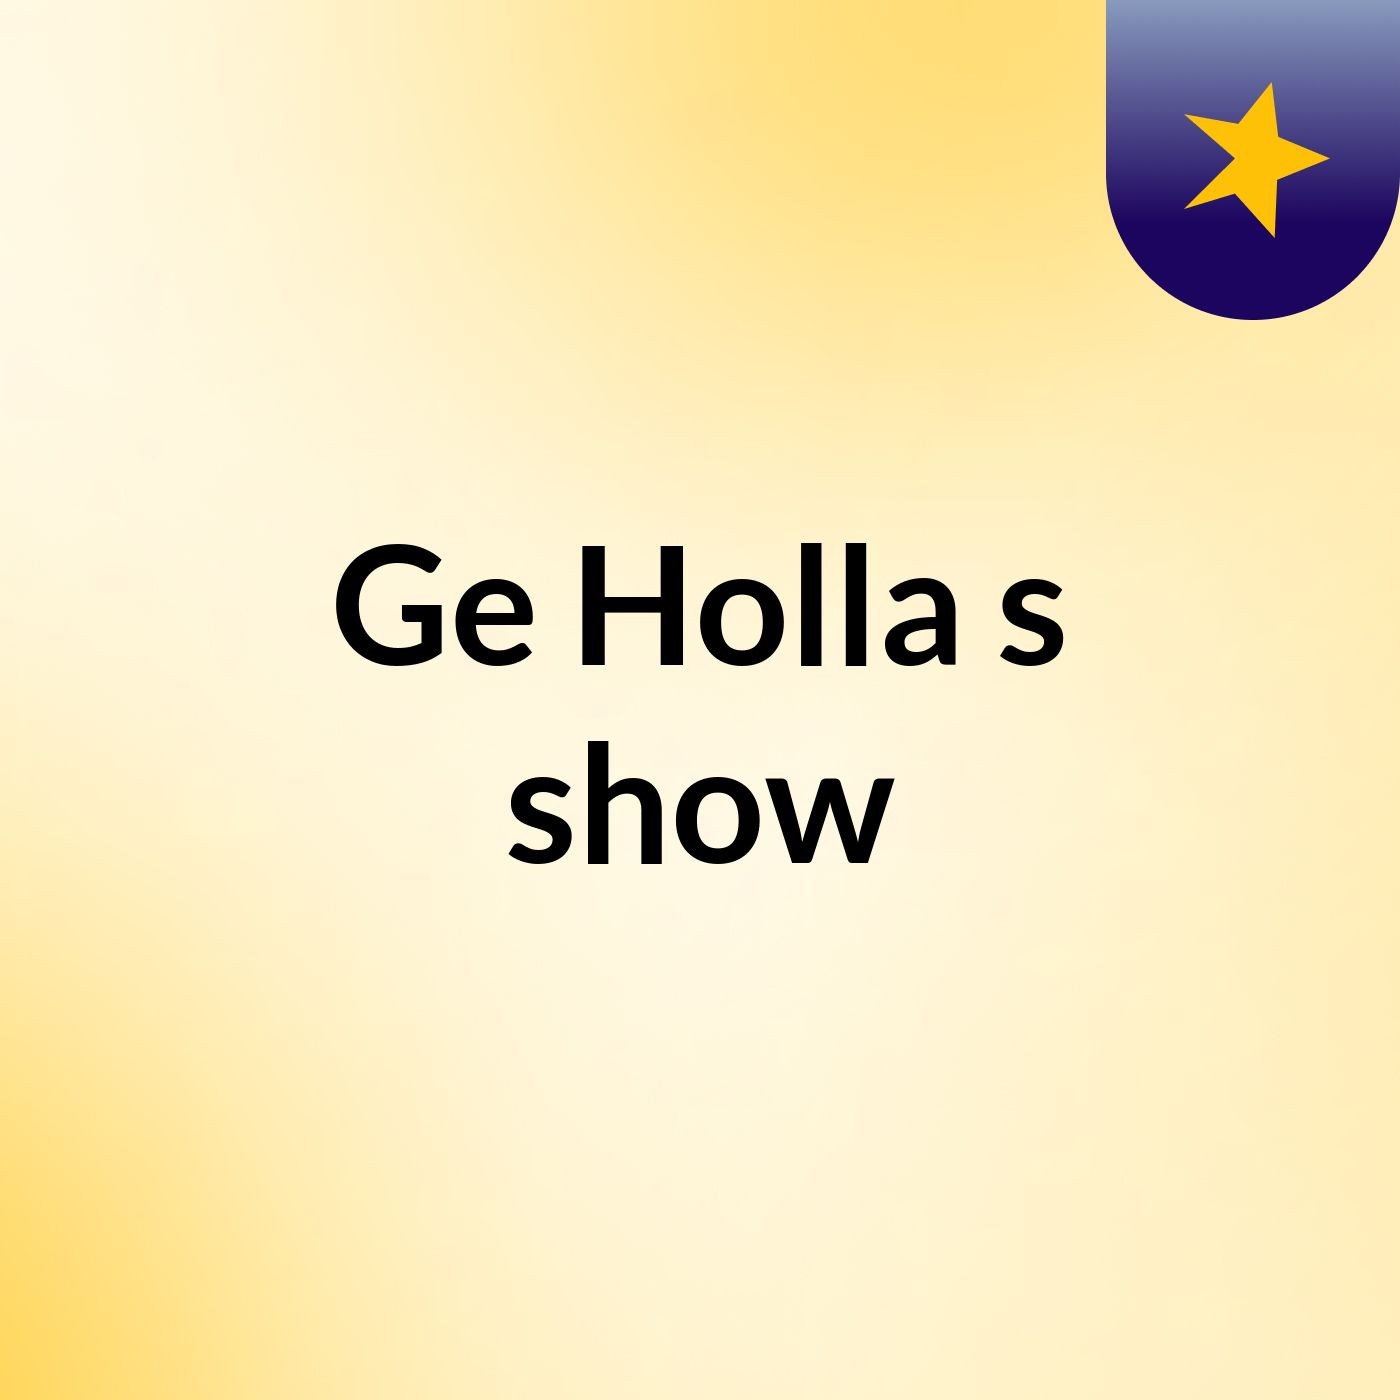 Ge Holla's show